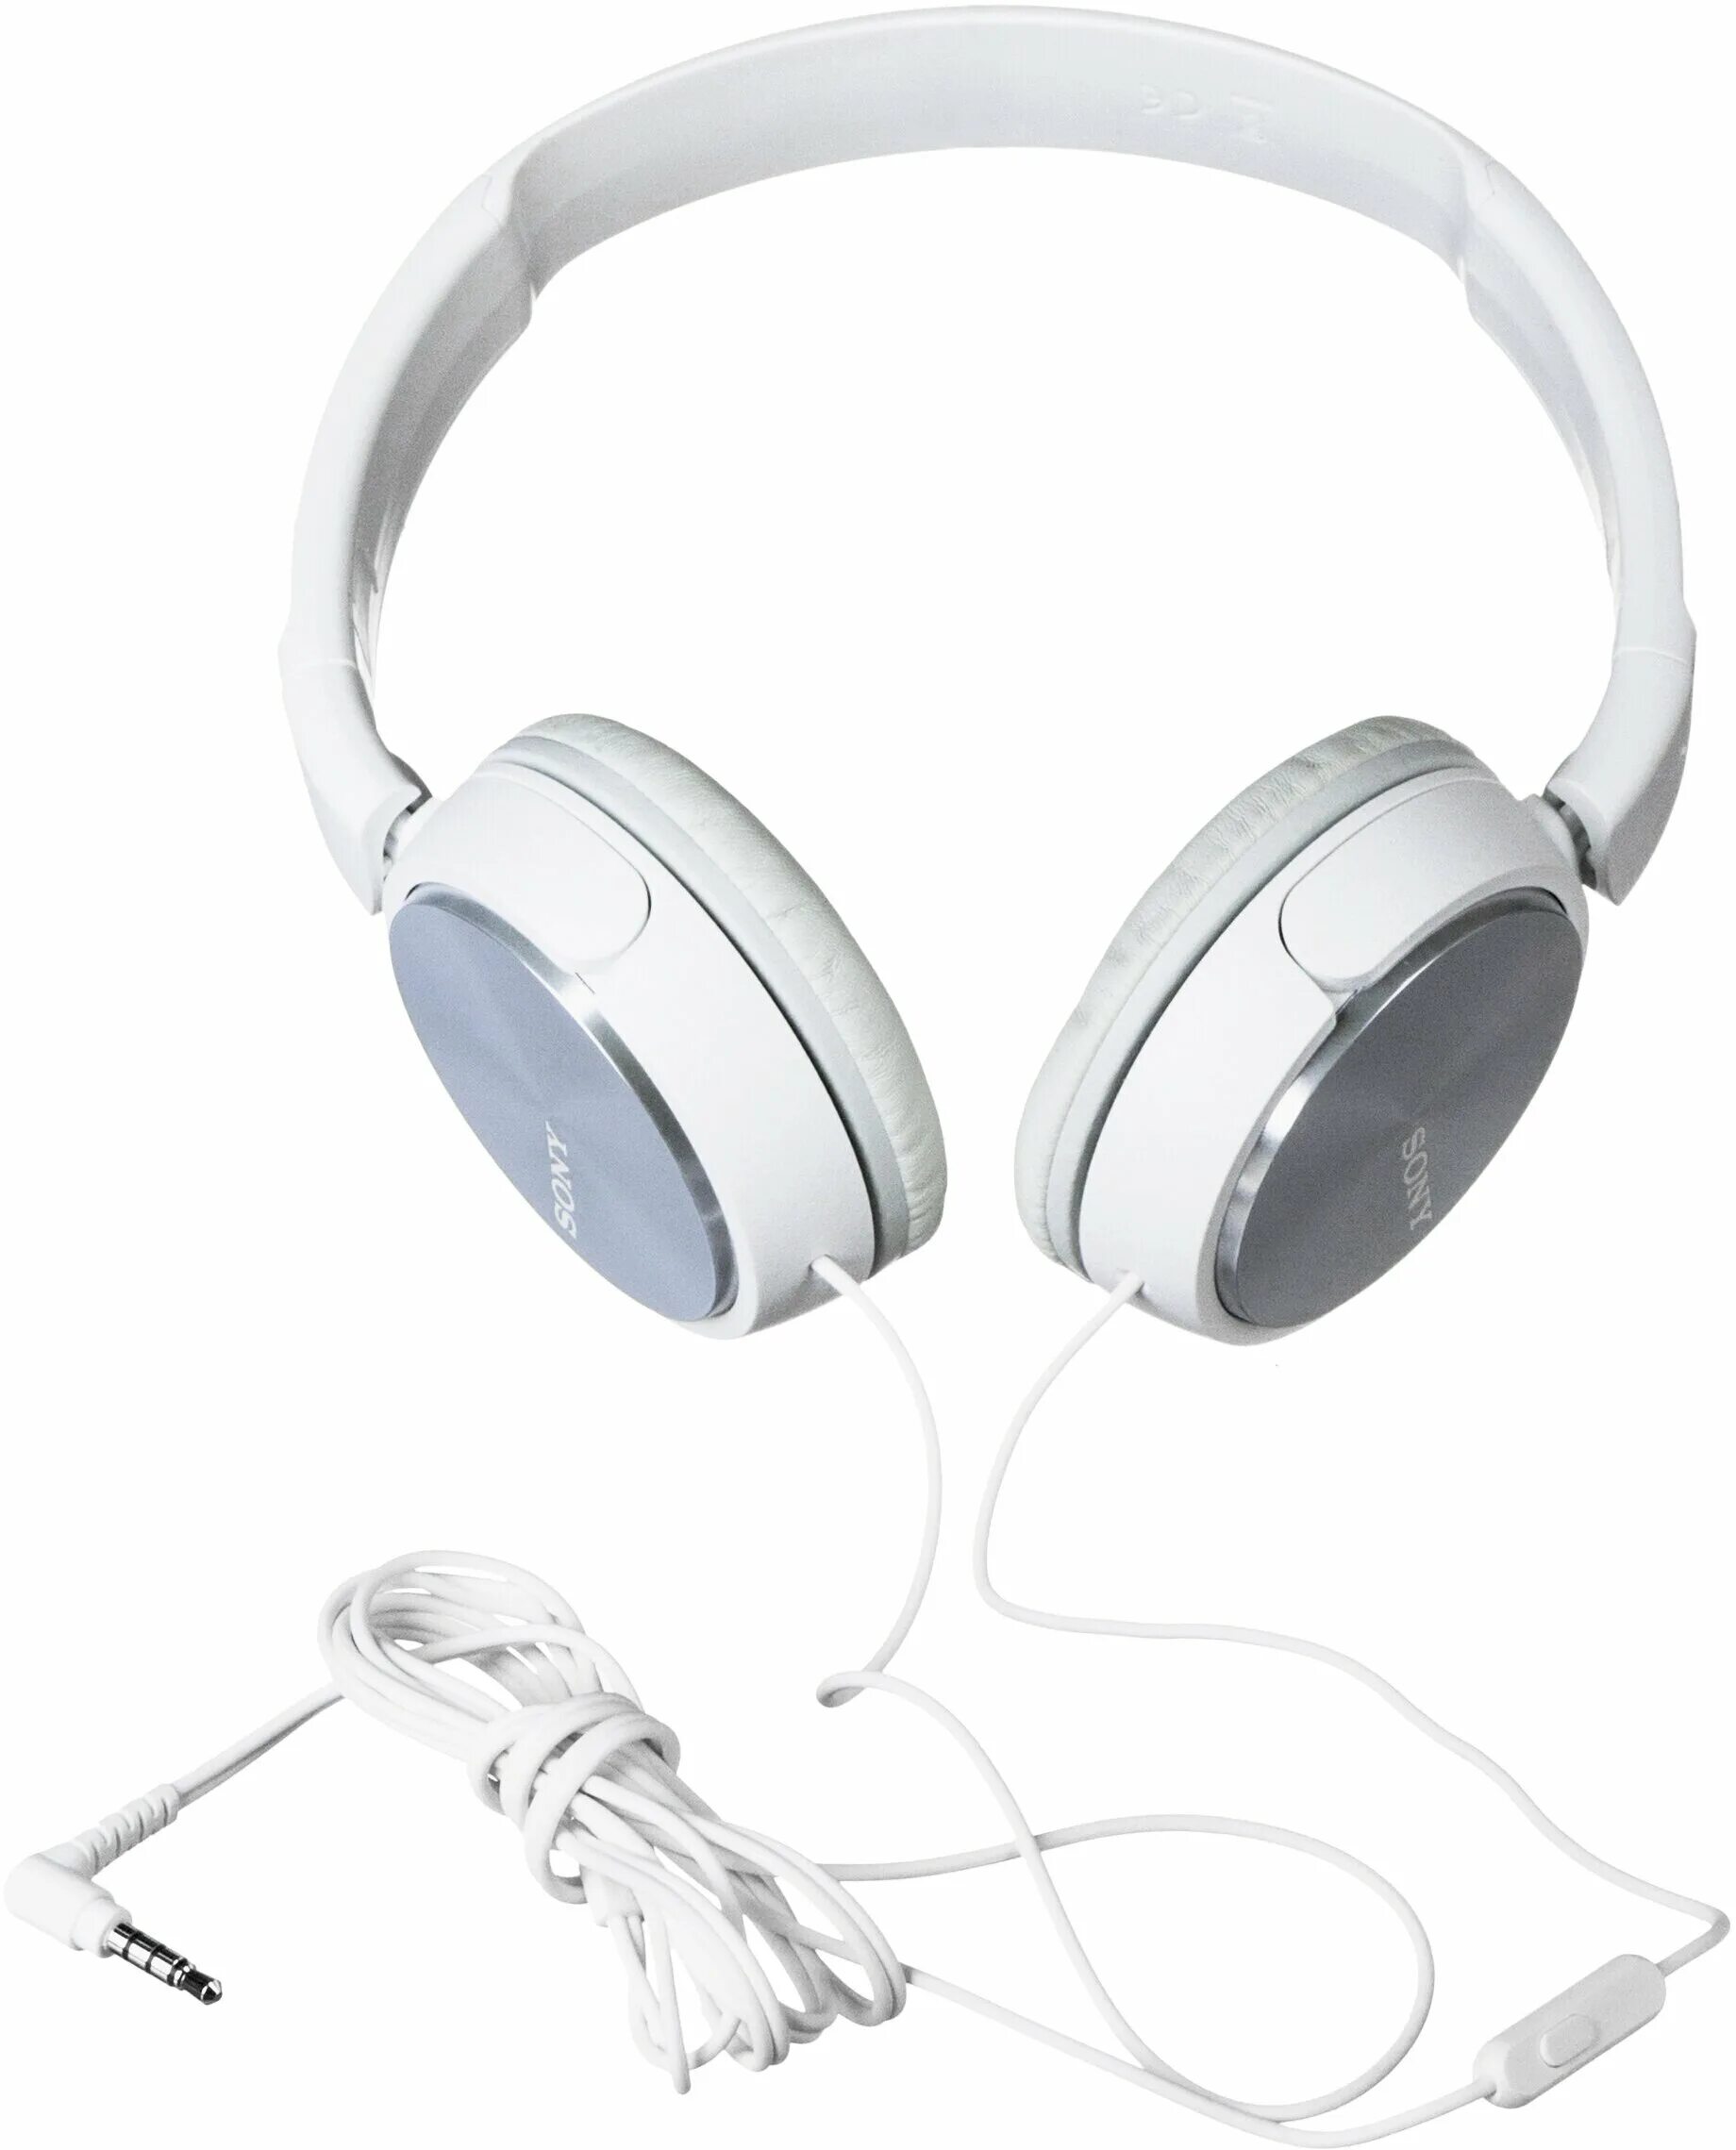 Sony MDR-zx310. Sony MDR-zx310ap White. Наушники Sony MDR-zx310. Наушники Sony MDR-zx310ap White.